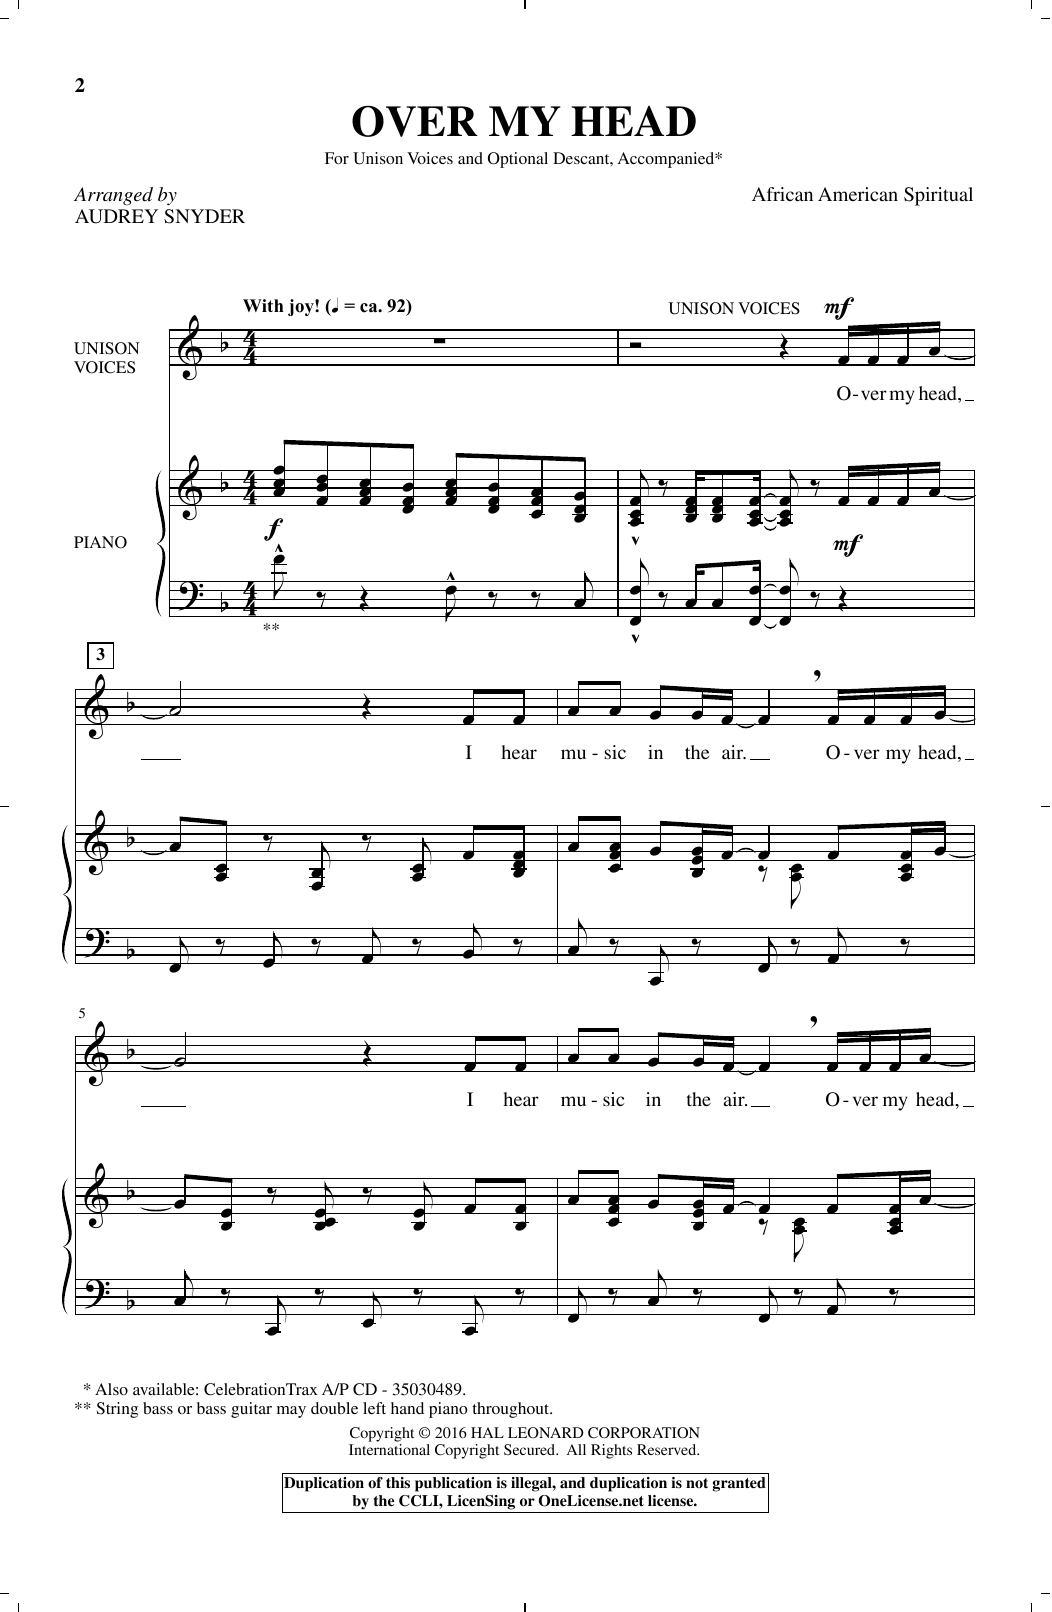 Download African-American Spiritual Over My Head (arr. Audrey Snyder) Sheet Music